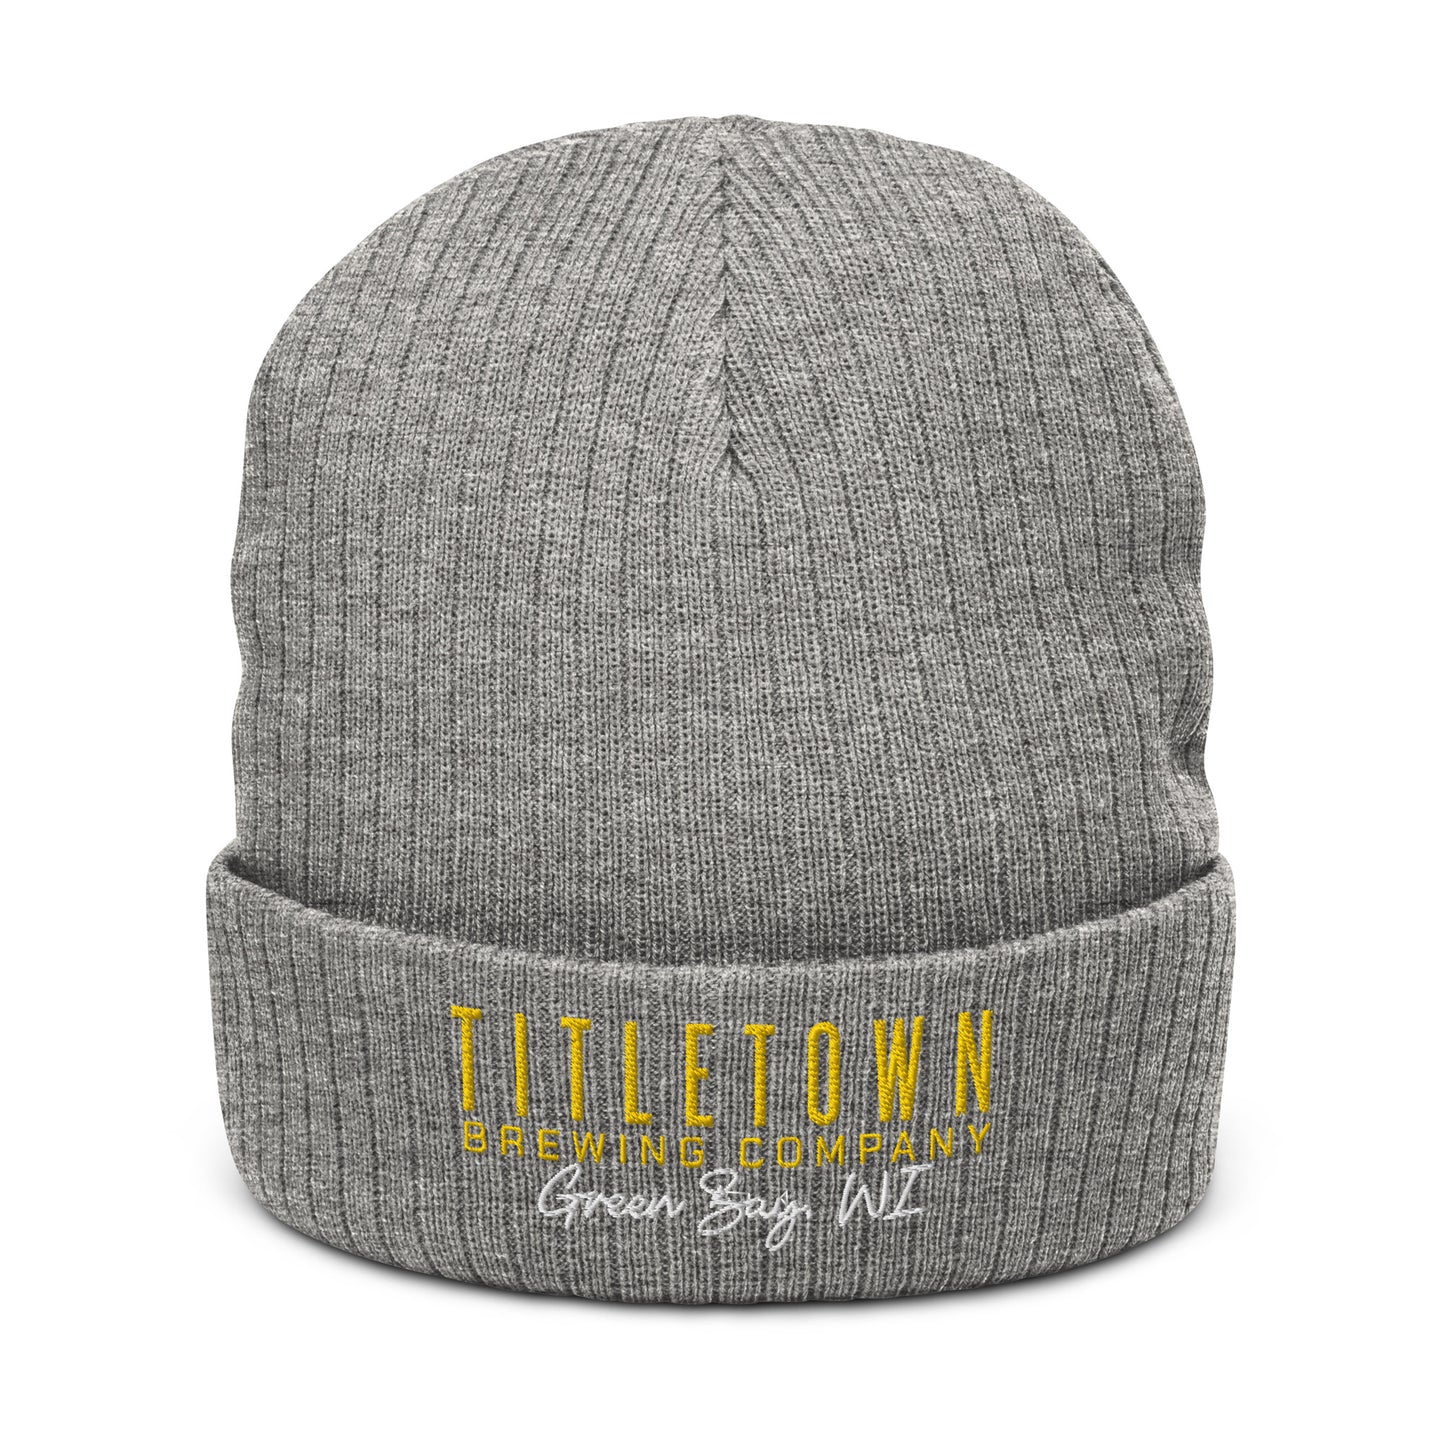 Titletown Brewing Company Ribbed knit beanie